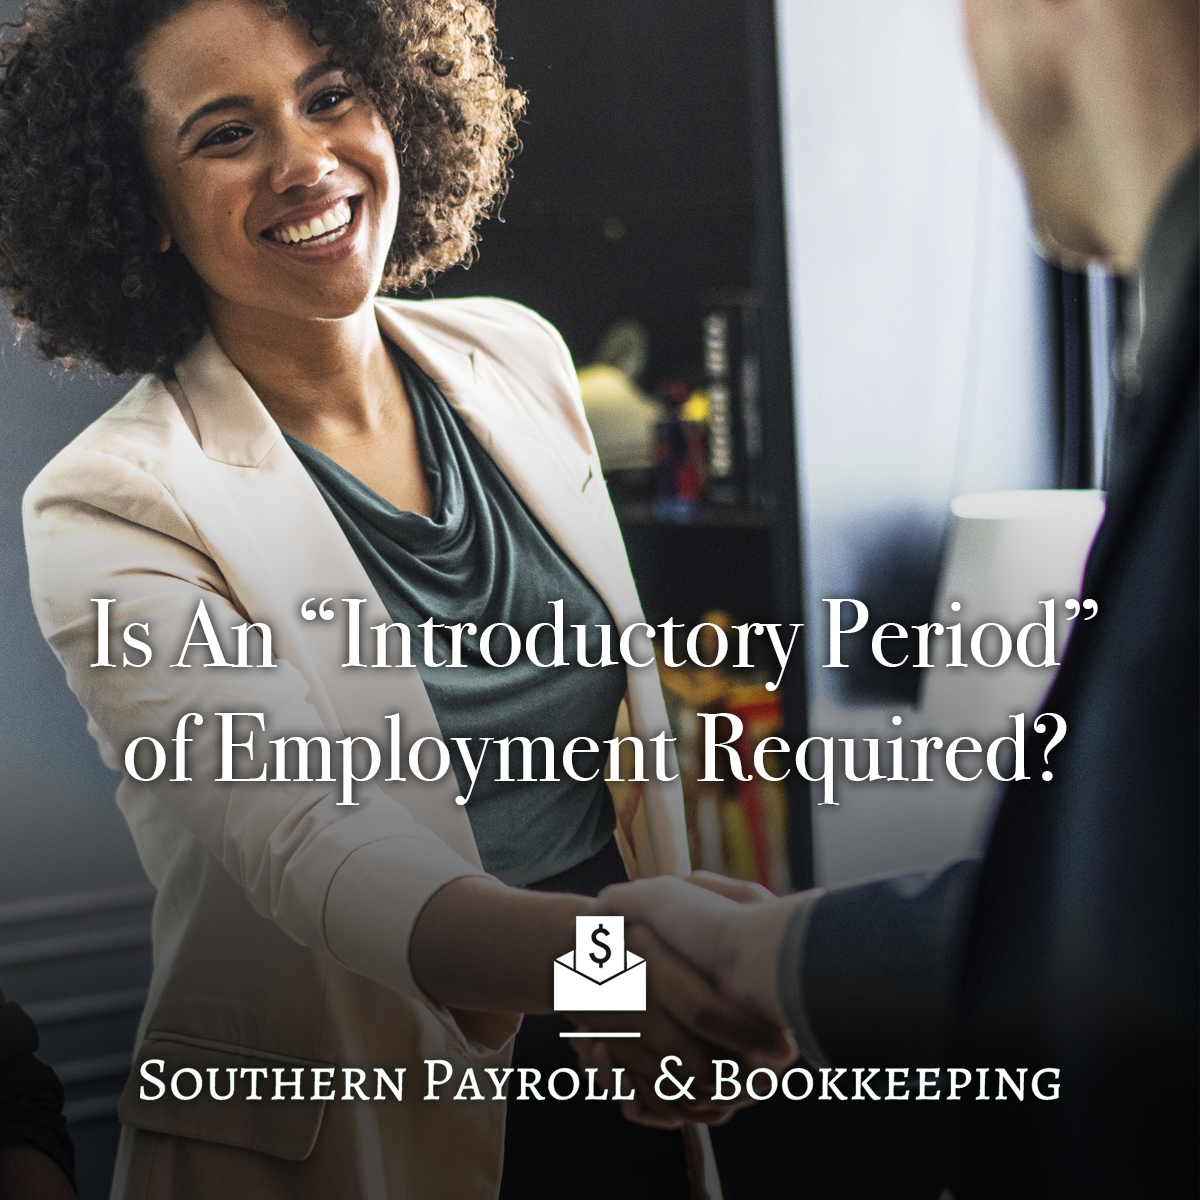 Is An “Introductory Period” of Employment Required?